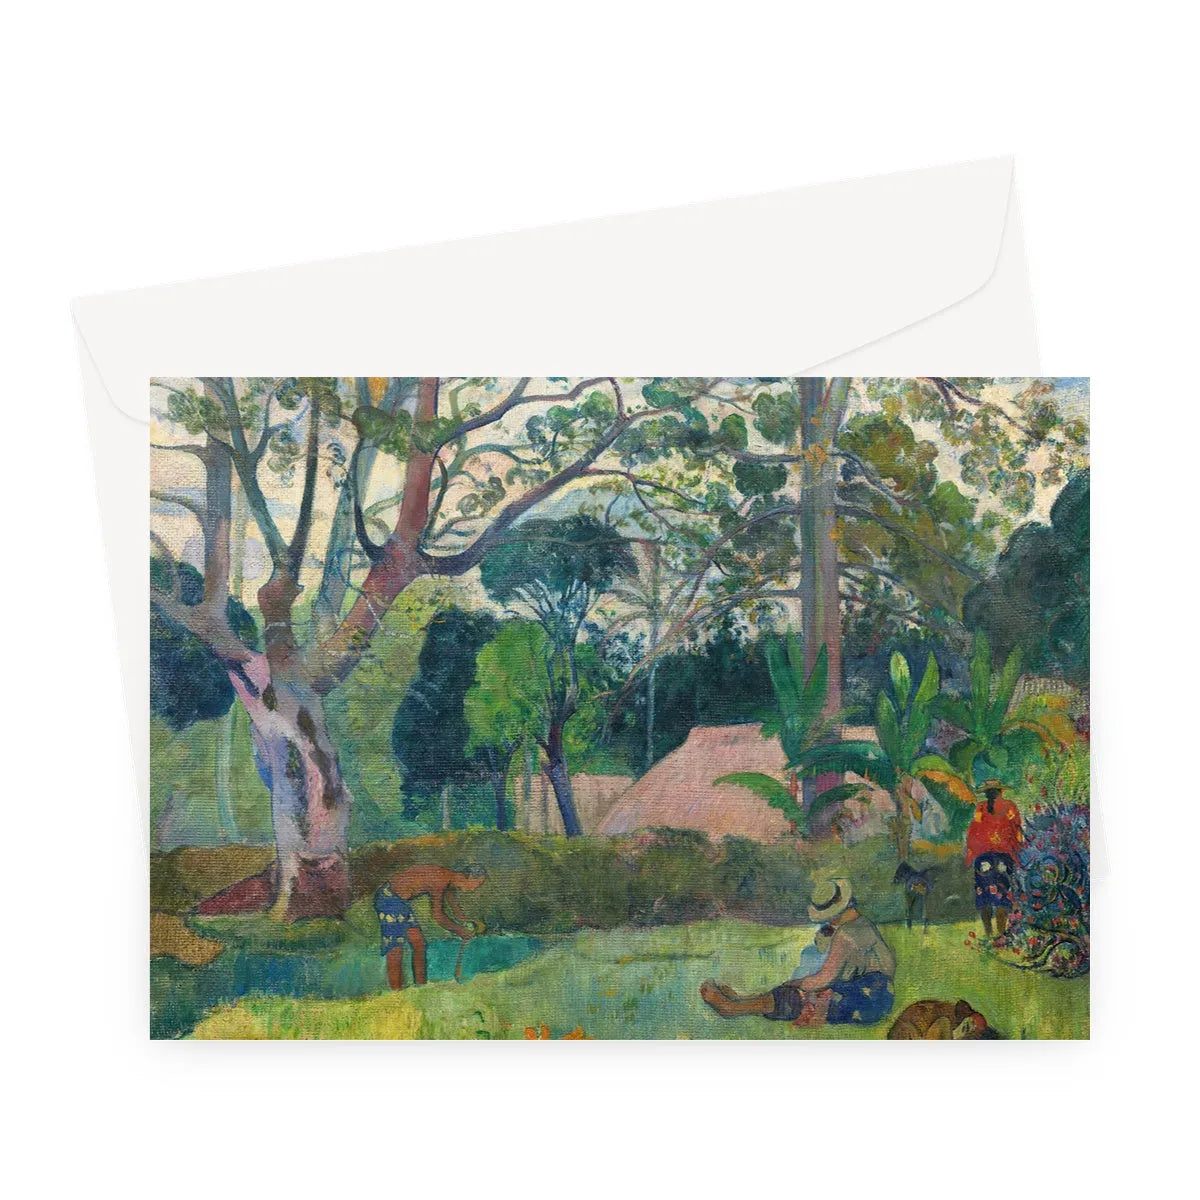 The Big Tree By Paul Gauguin Greeting Card - A5 Landscape / 1 Card - Notebooks & Notepads - Aesthetic Art